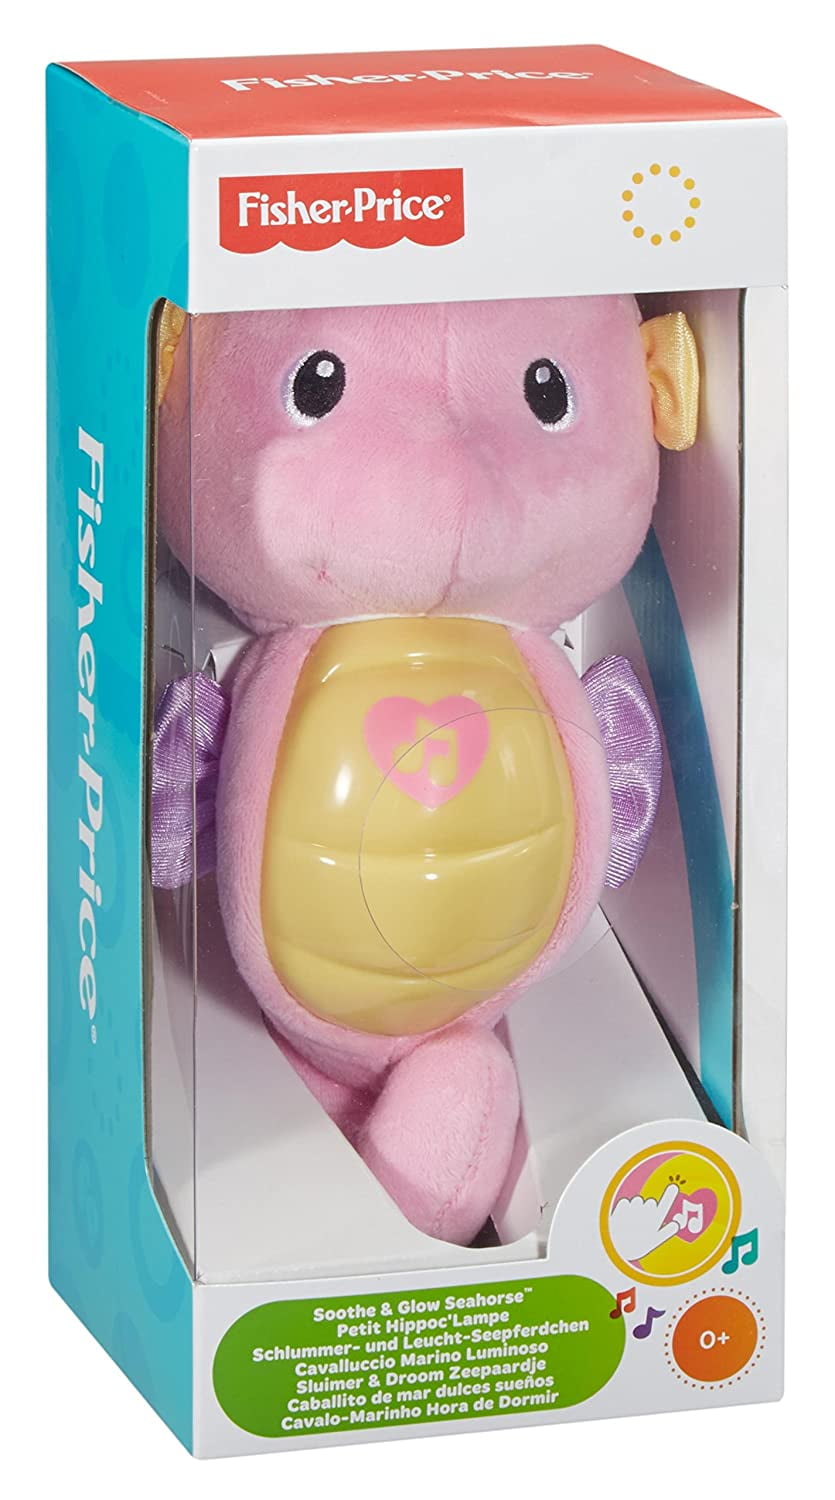 Fisher-Price DGH82 Soothe and Glow Seahorse